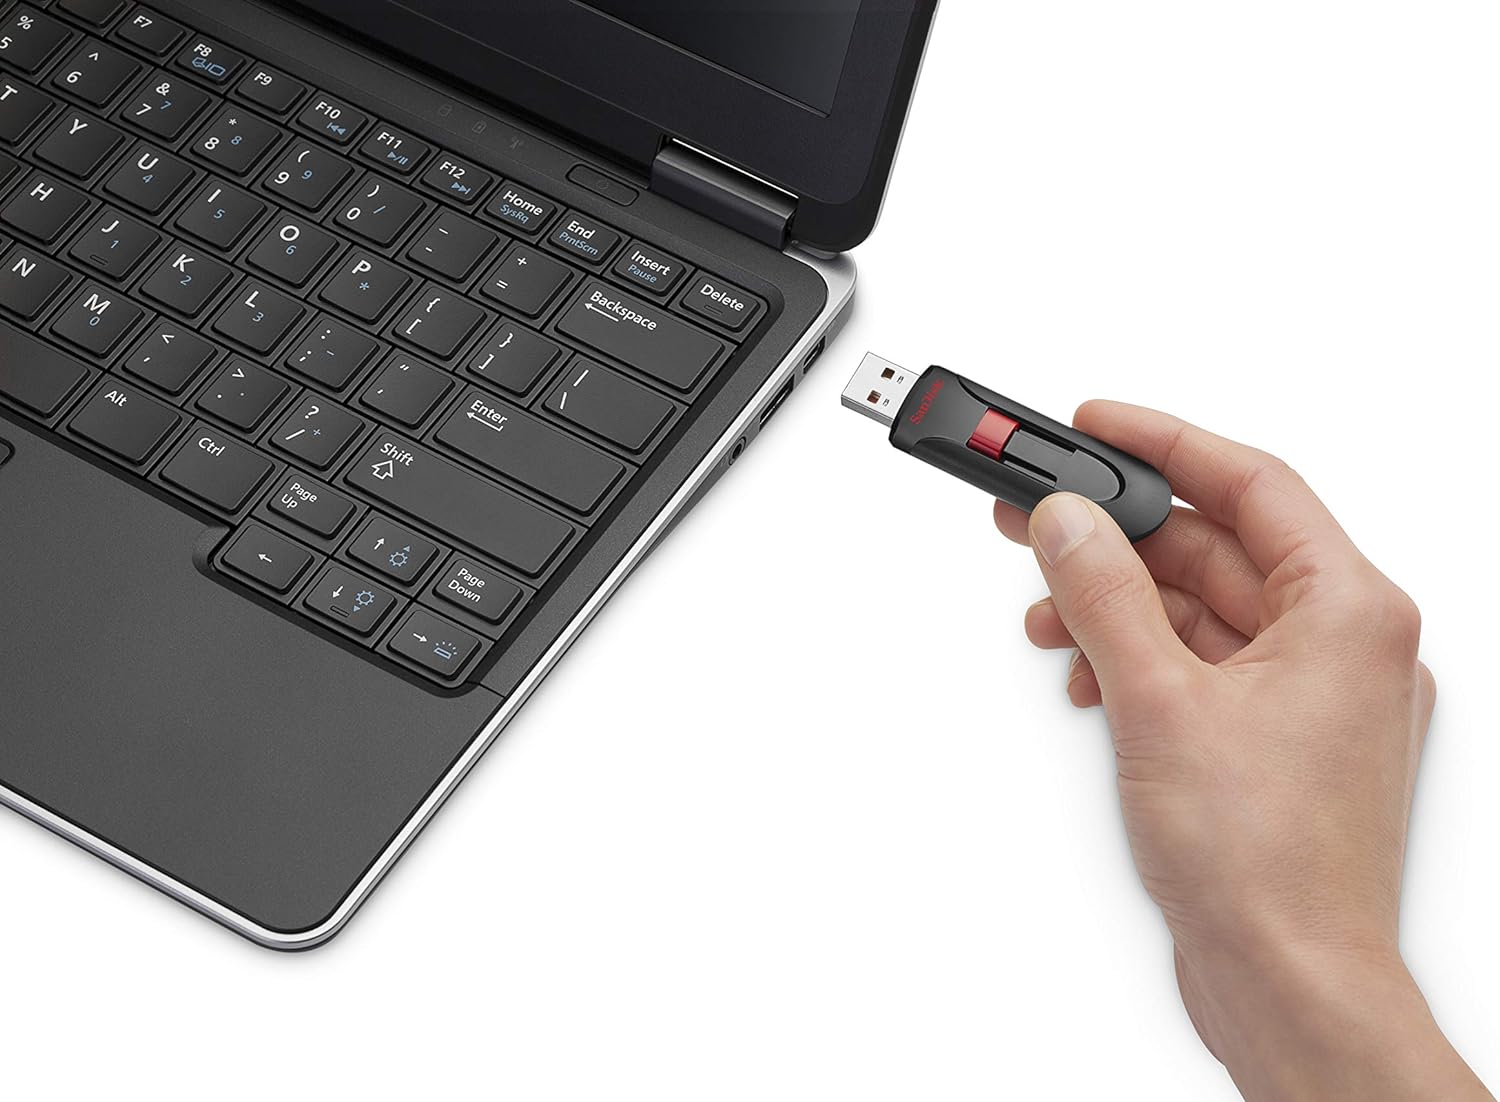 SanDisk 256GB Cruzer Glide USB 2.0 Flash Drive - A Reliable and Secure Storage Solution